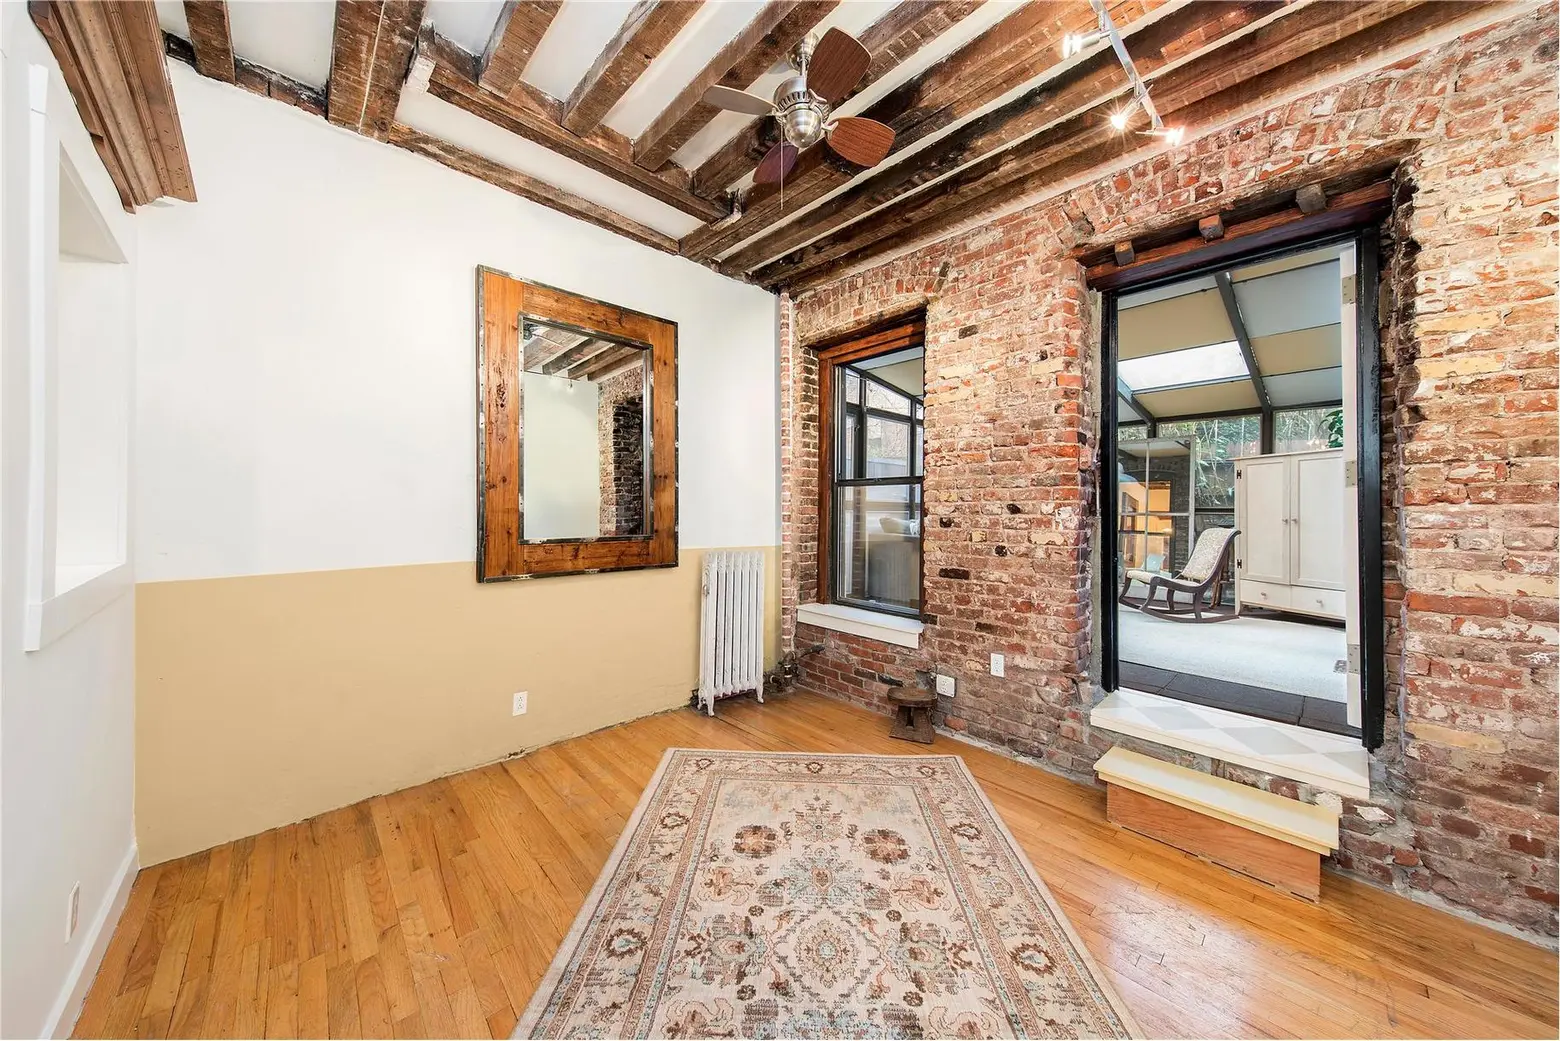 With a Cool Renovation and a Sunroom, This Tiny East Village Home Transcends the Ordinary